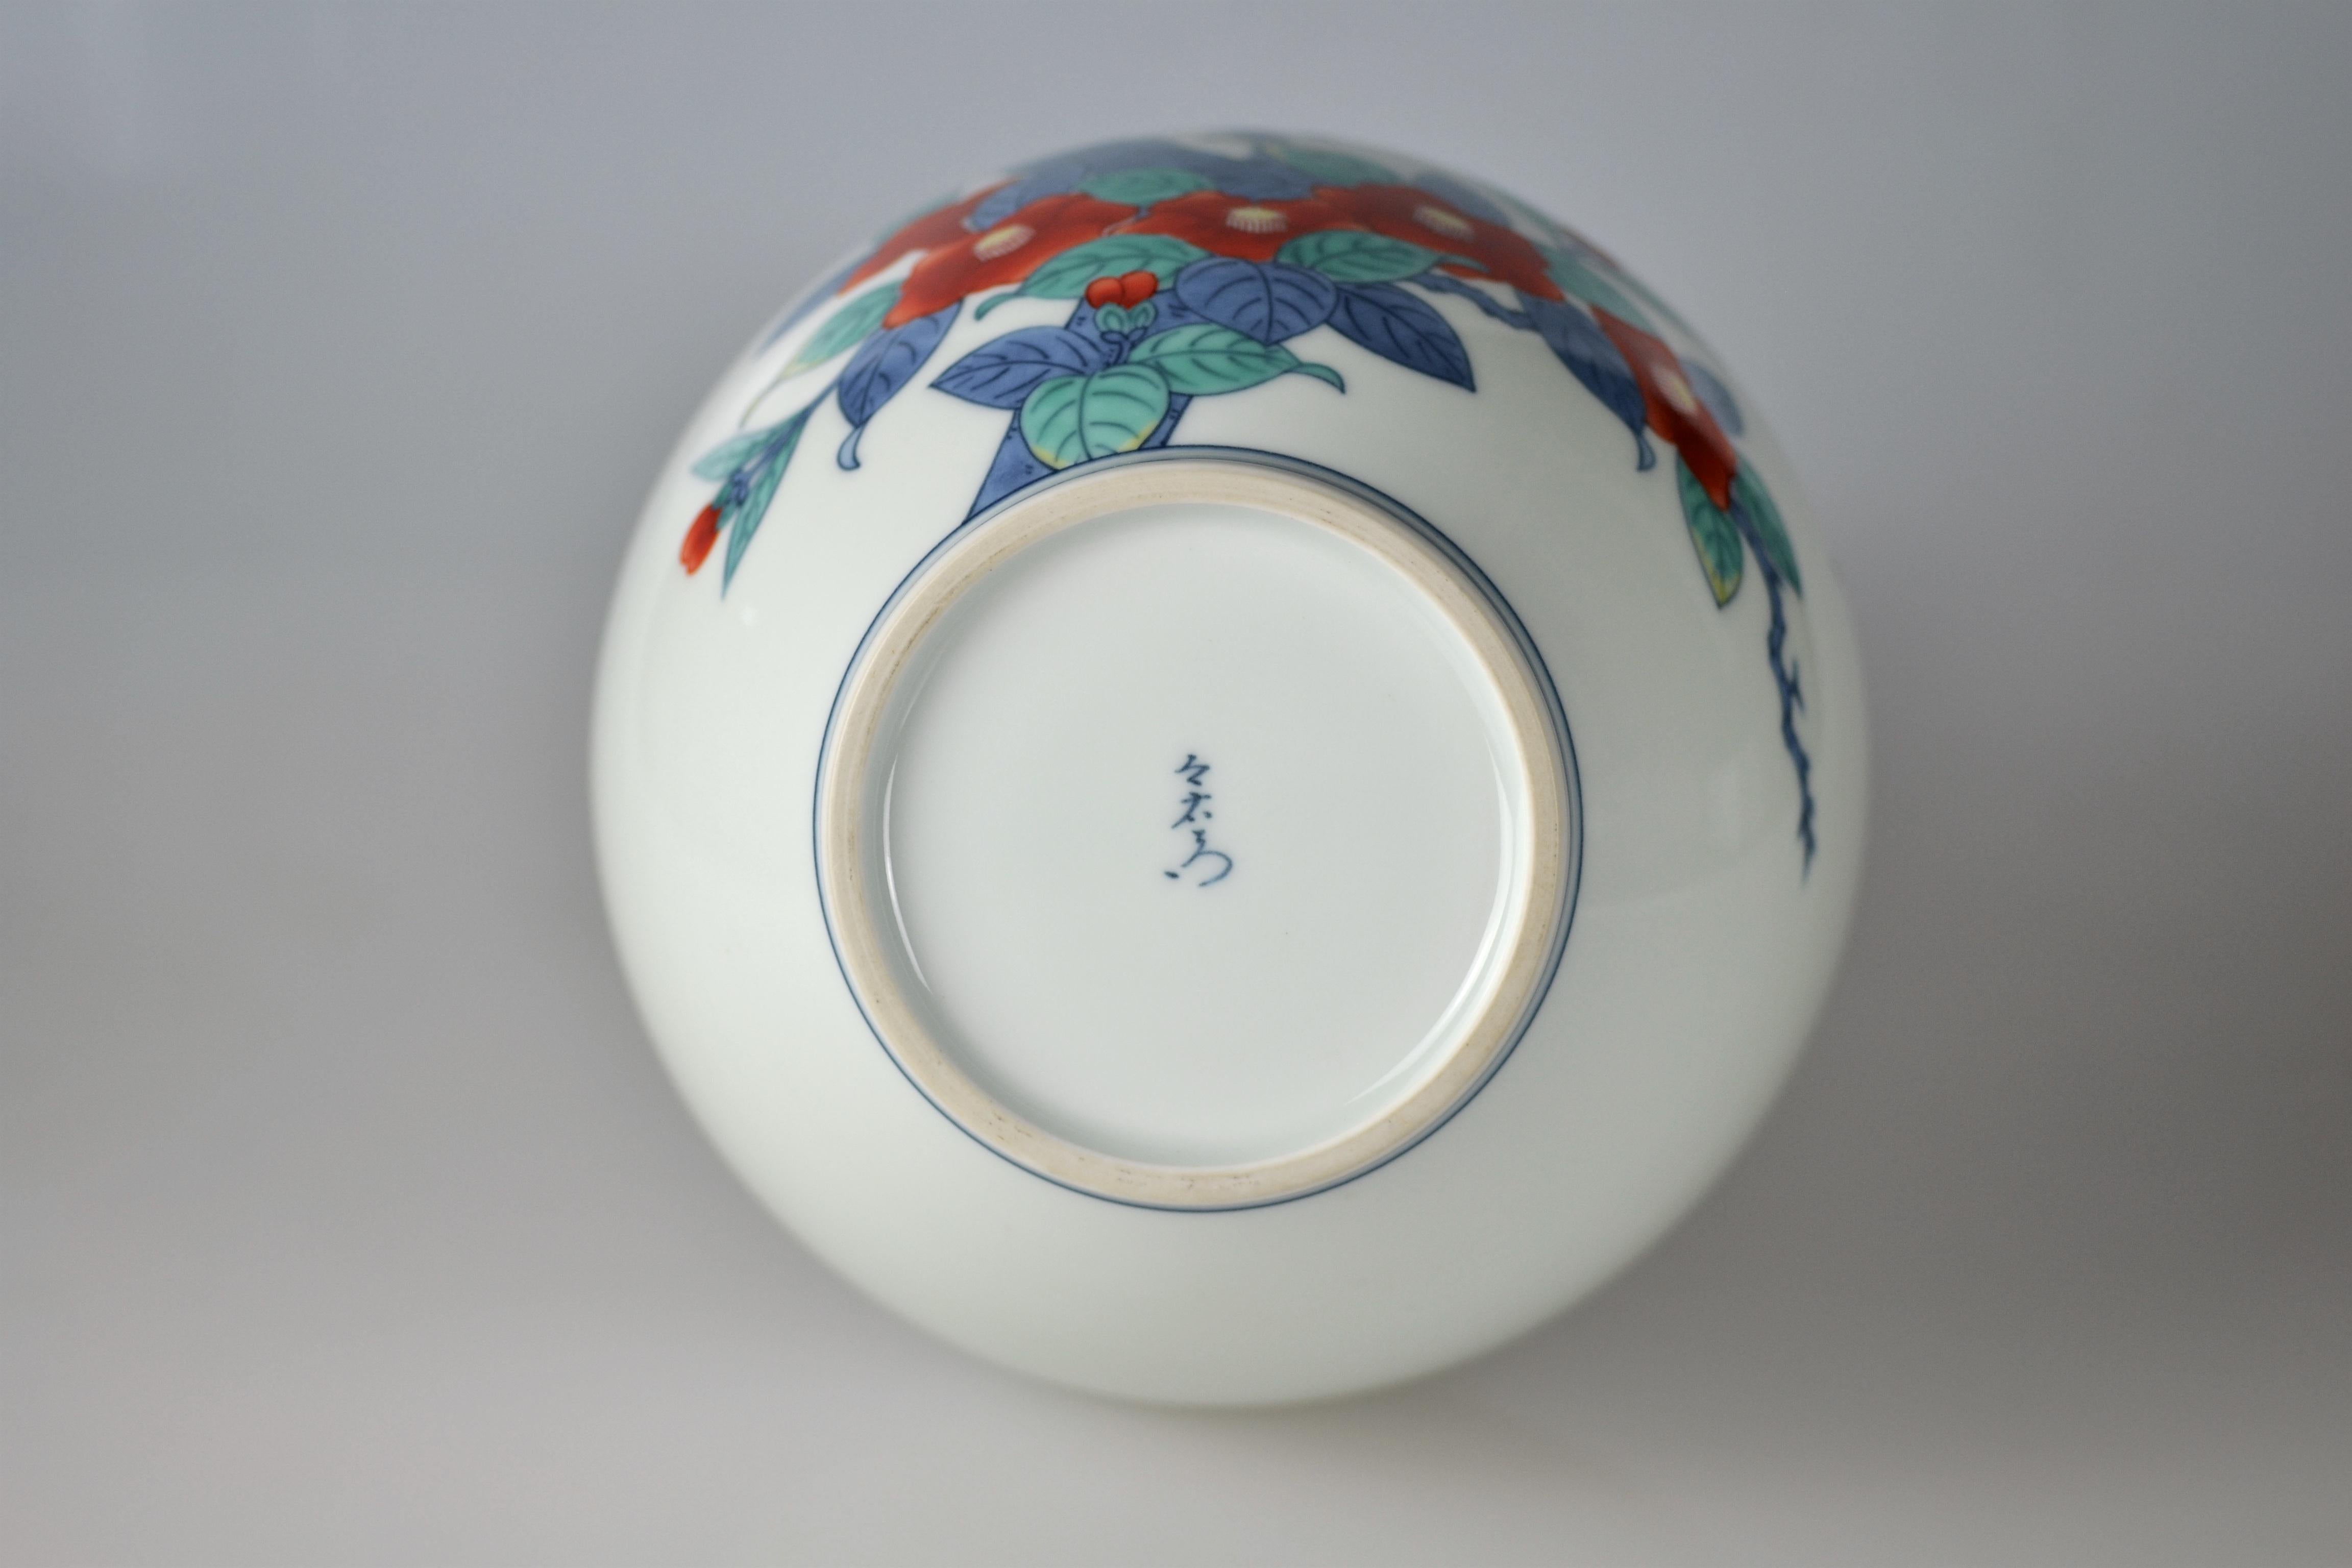 Porcelain Flower Vase by Living National Treasure Imaizumi Imaemon XIII In Excellent Condition For Sale In Berlin, Berlin